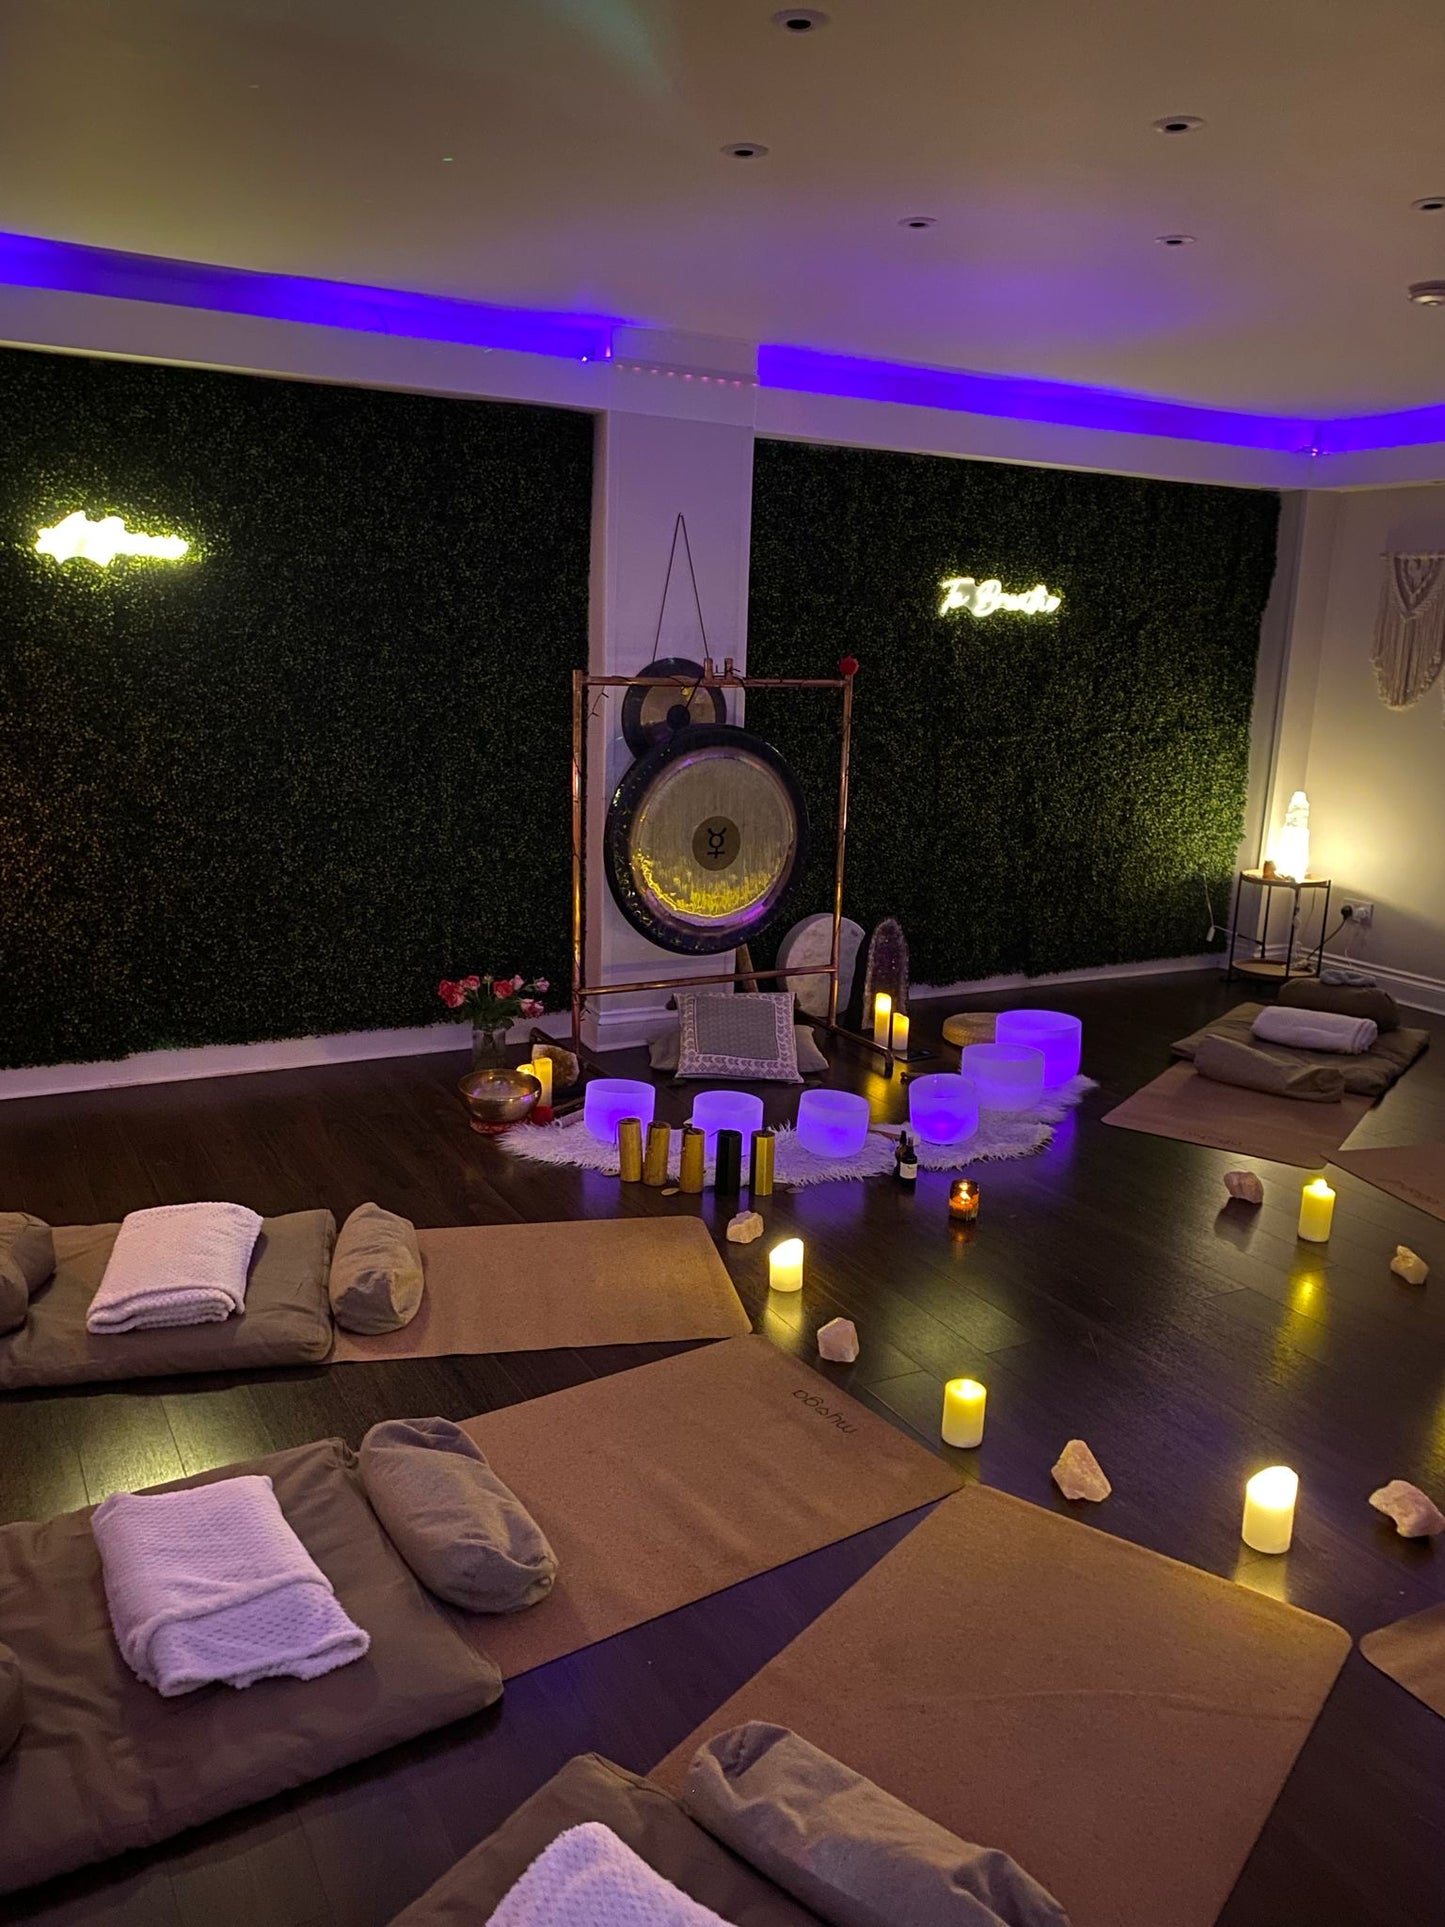 Full Moon Shamanic Gong Bath On The 26th Of April 7.30 - 9.15pm